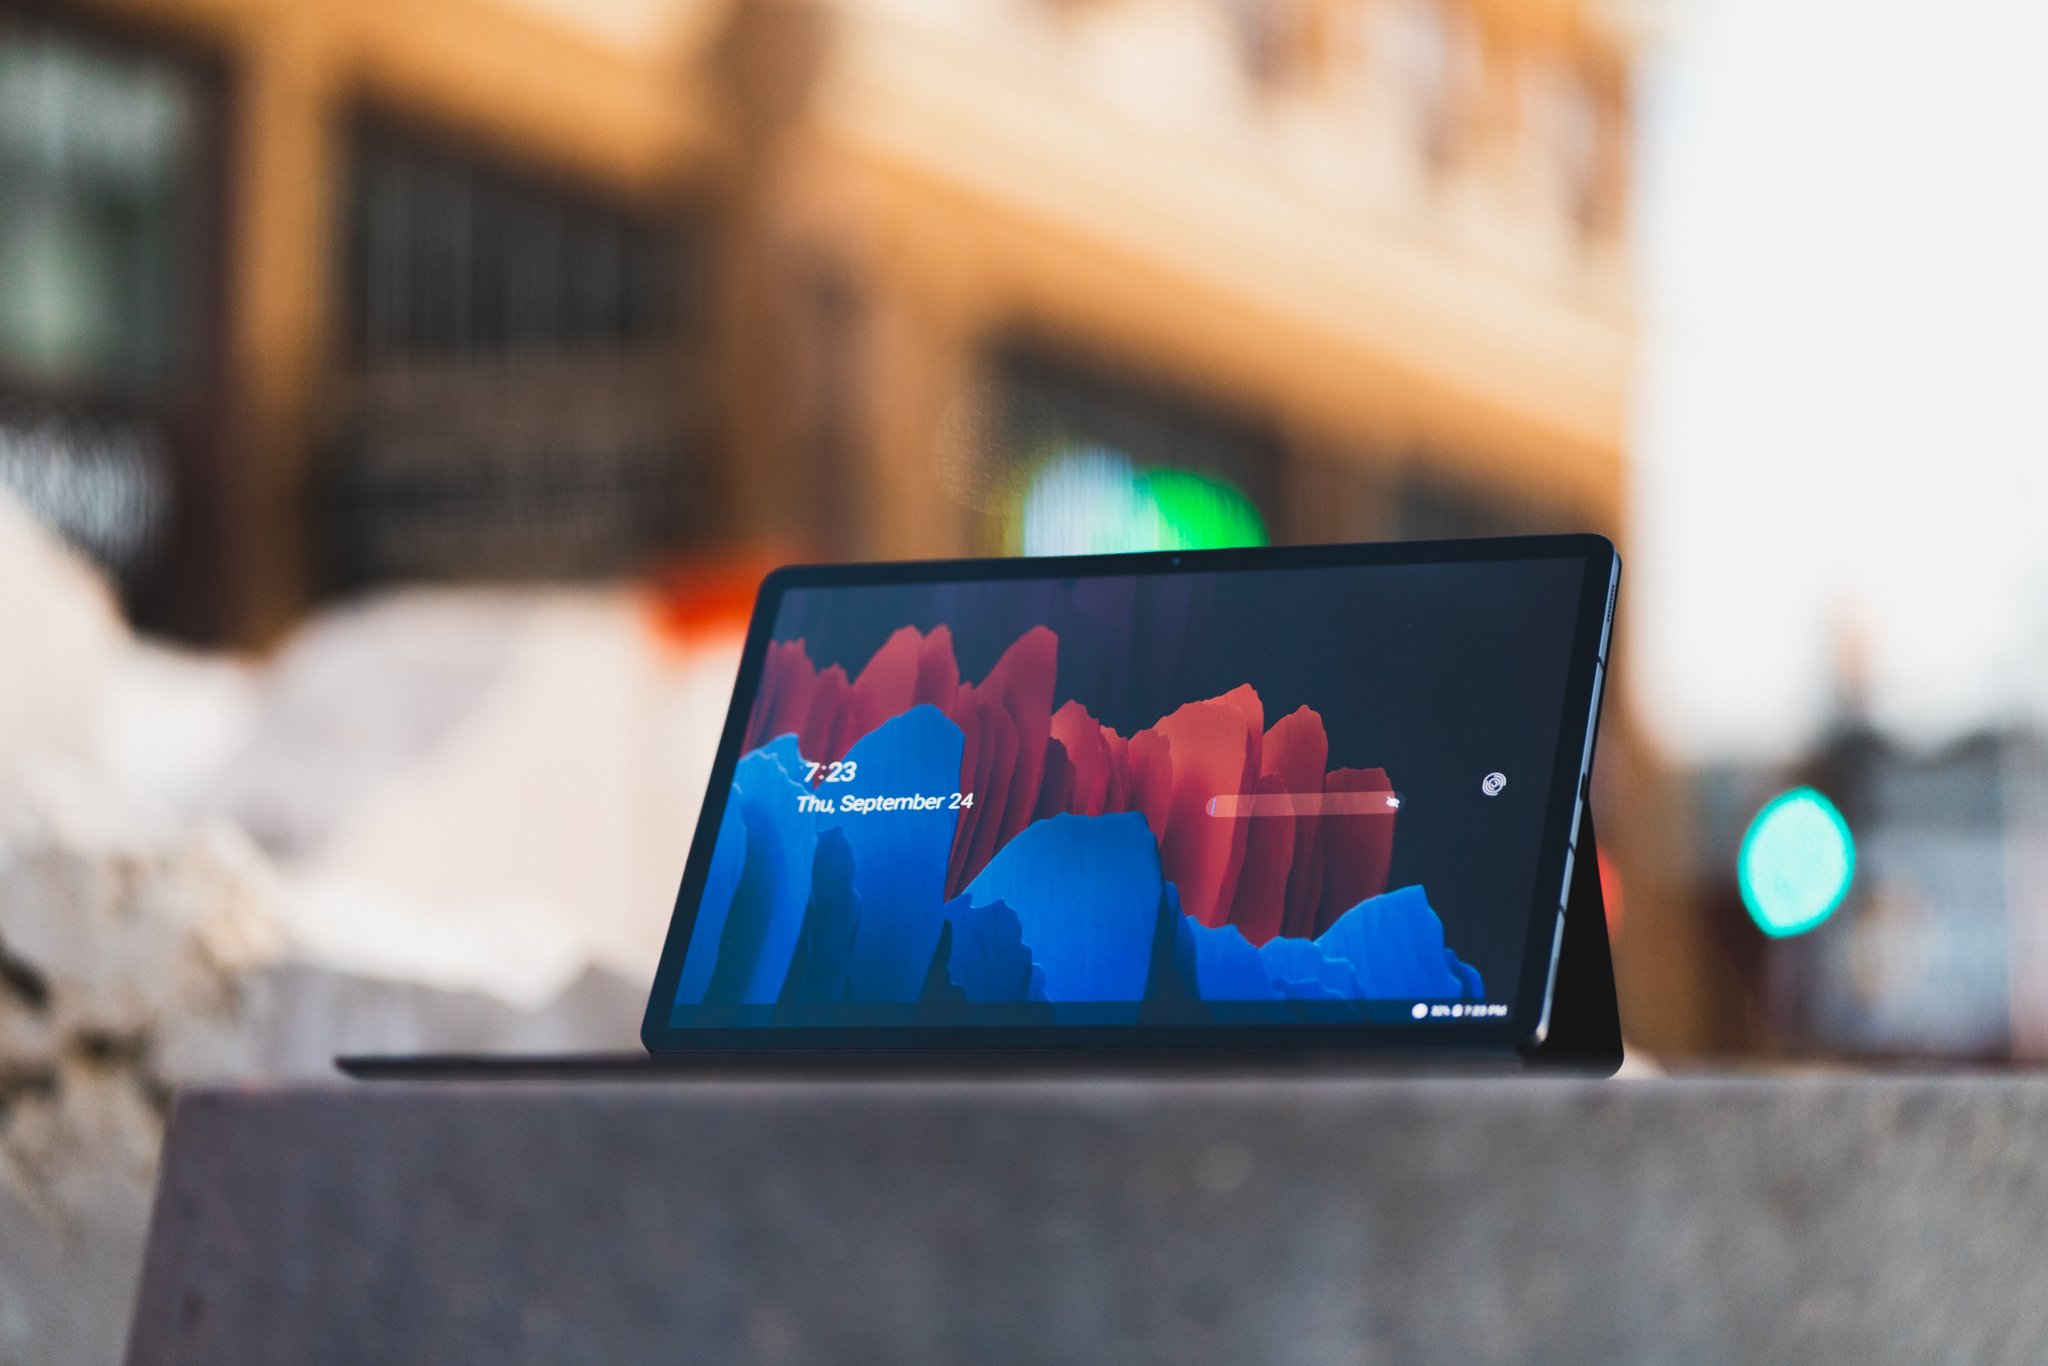 Samsung Galaxy Tab S7 Plus review: The best Android tablet money